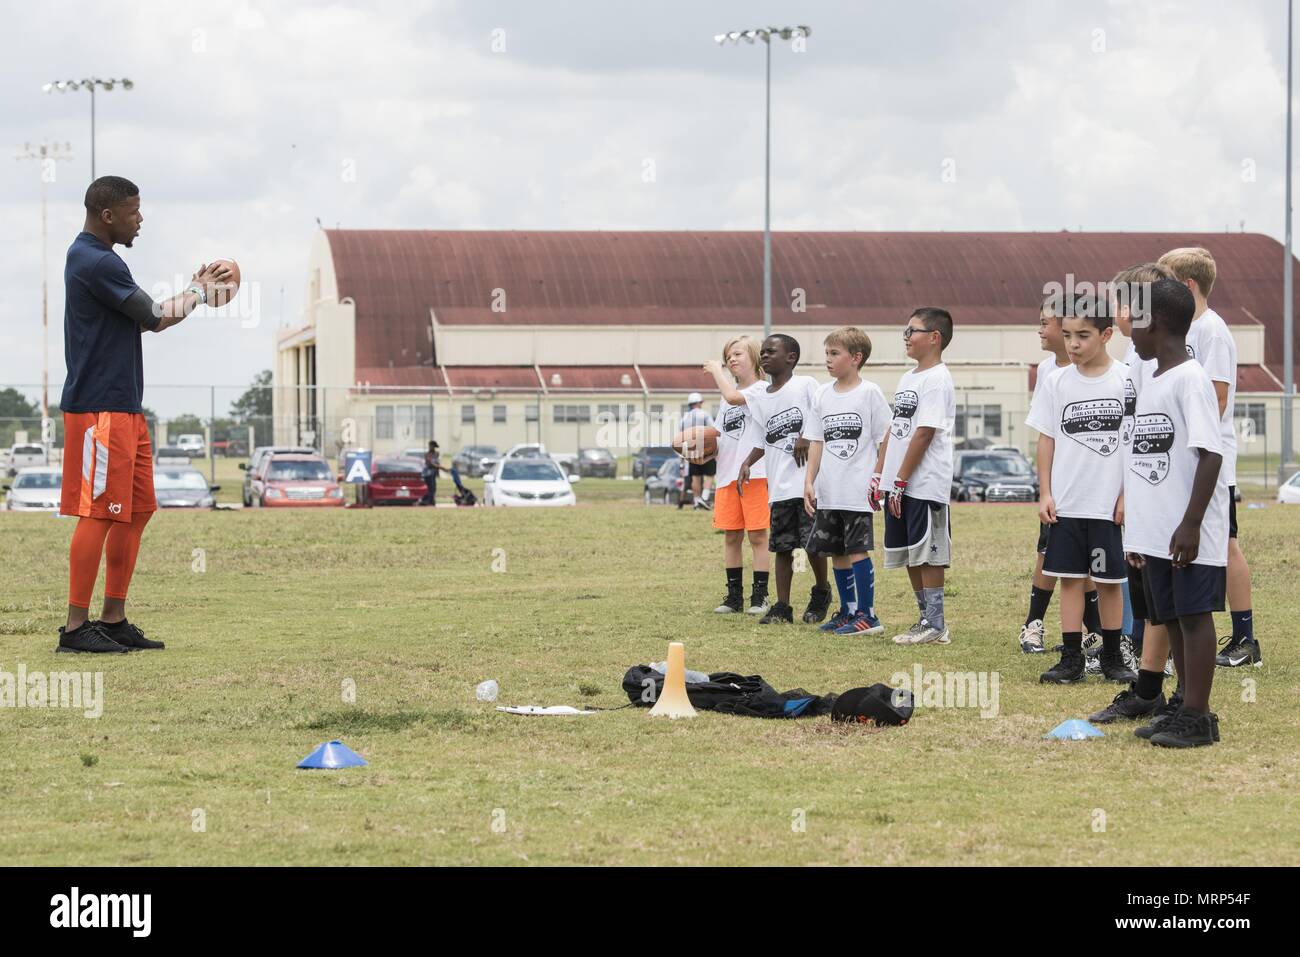 Terrance Williams, Dallas Cowboys wide receiver, coaches children during a  youth football camp June 26, 2017, at Joint Base San Antonio-Randolph.  JBSA-Randolph was one of the 11 military communities selected to host